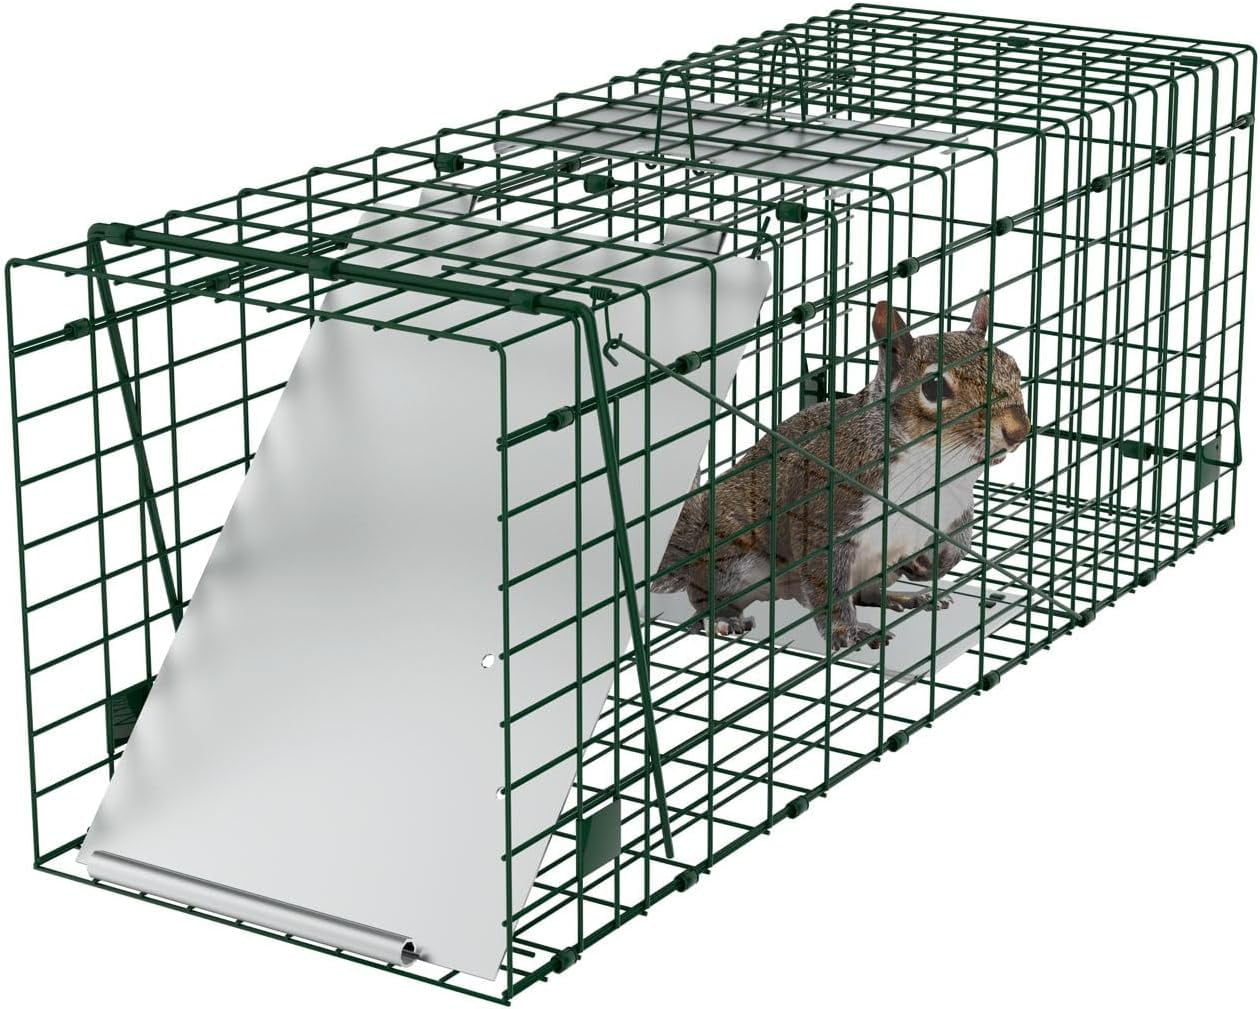  Havahart 1079SR Large 1-Door Humane Catch and Release Live Animal  Trap for Raccoons, Cats, Bobcats, Beavers, Small Dogs, Groundhogs,  Opossums, Foxes, Armadillos, and Similar-Sized Animals : Home Pest Control  Traps 